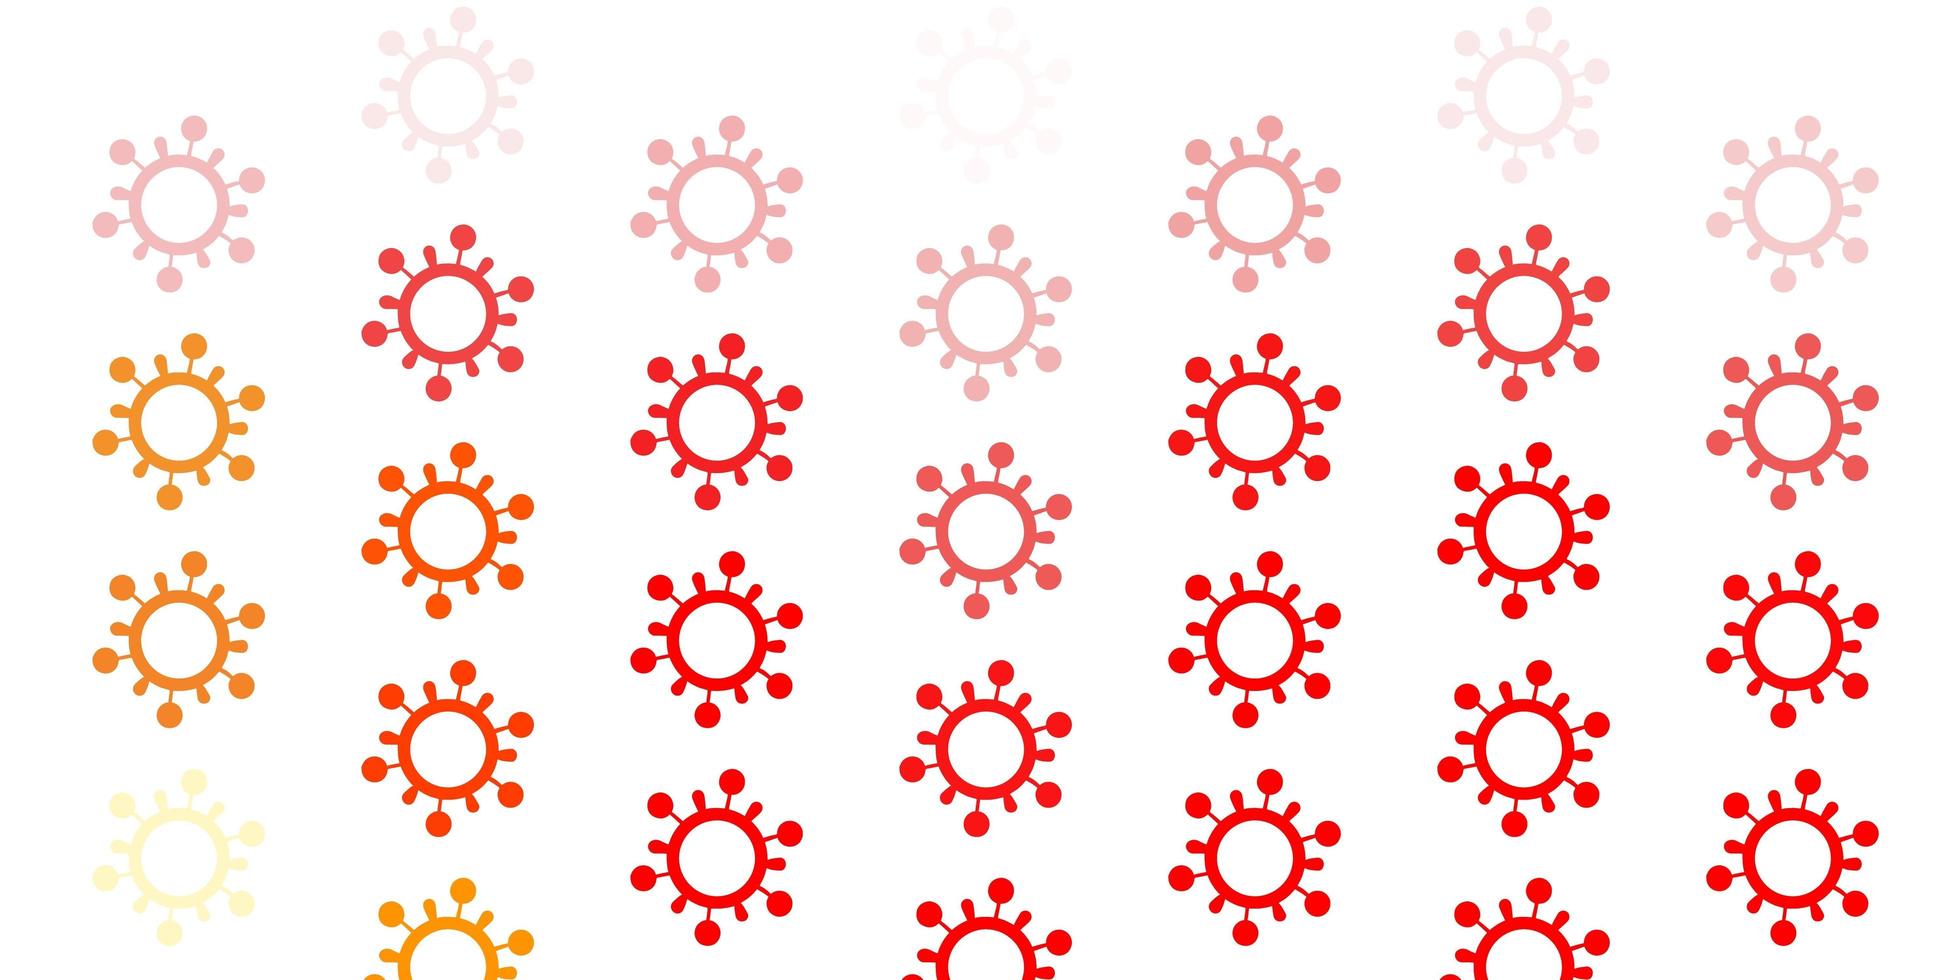 Light Red, Yellow backdrop with virus symbols. vector